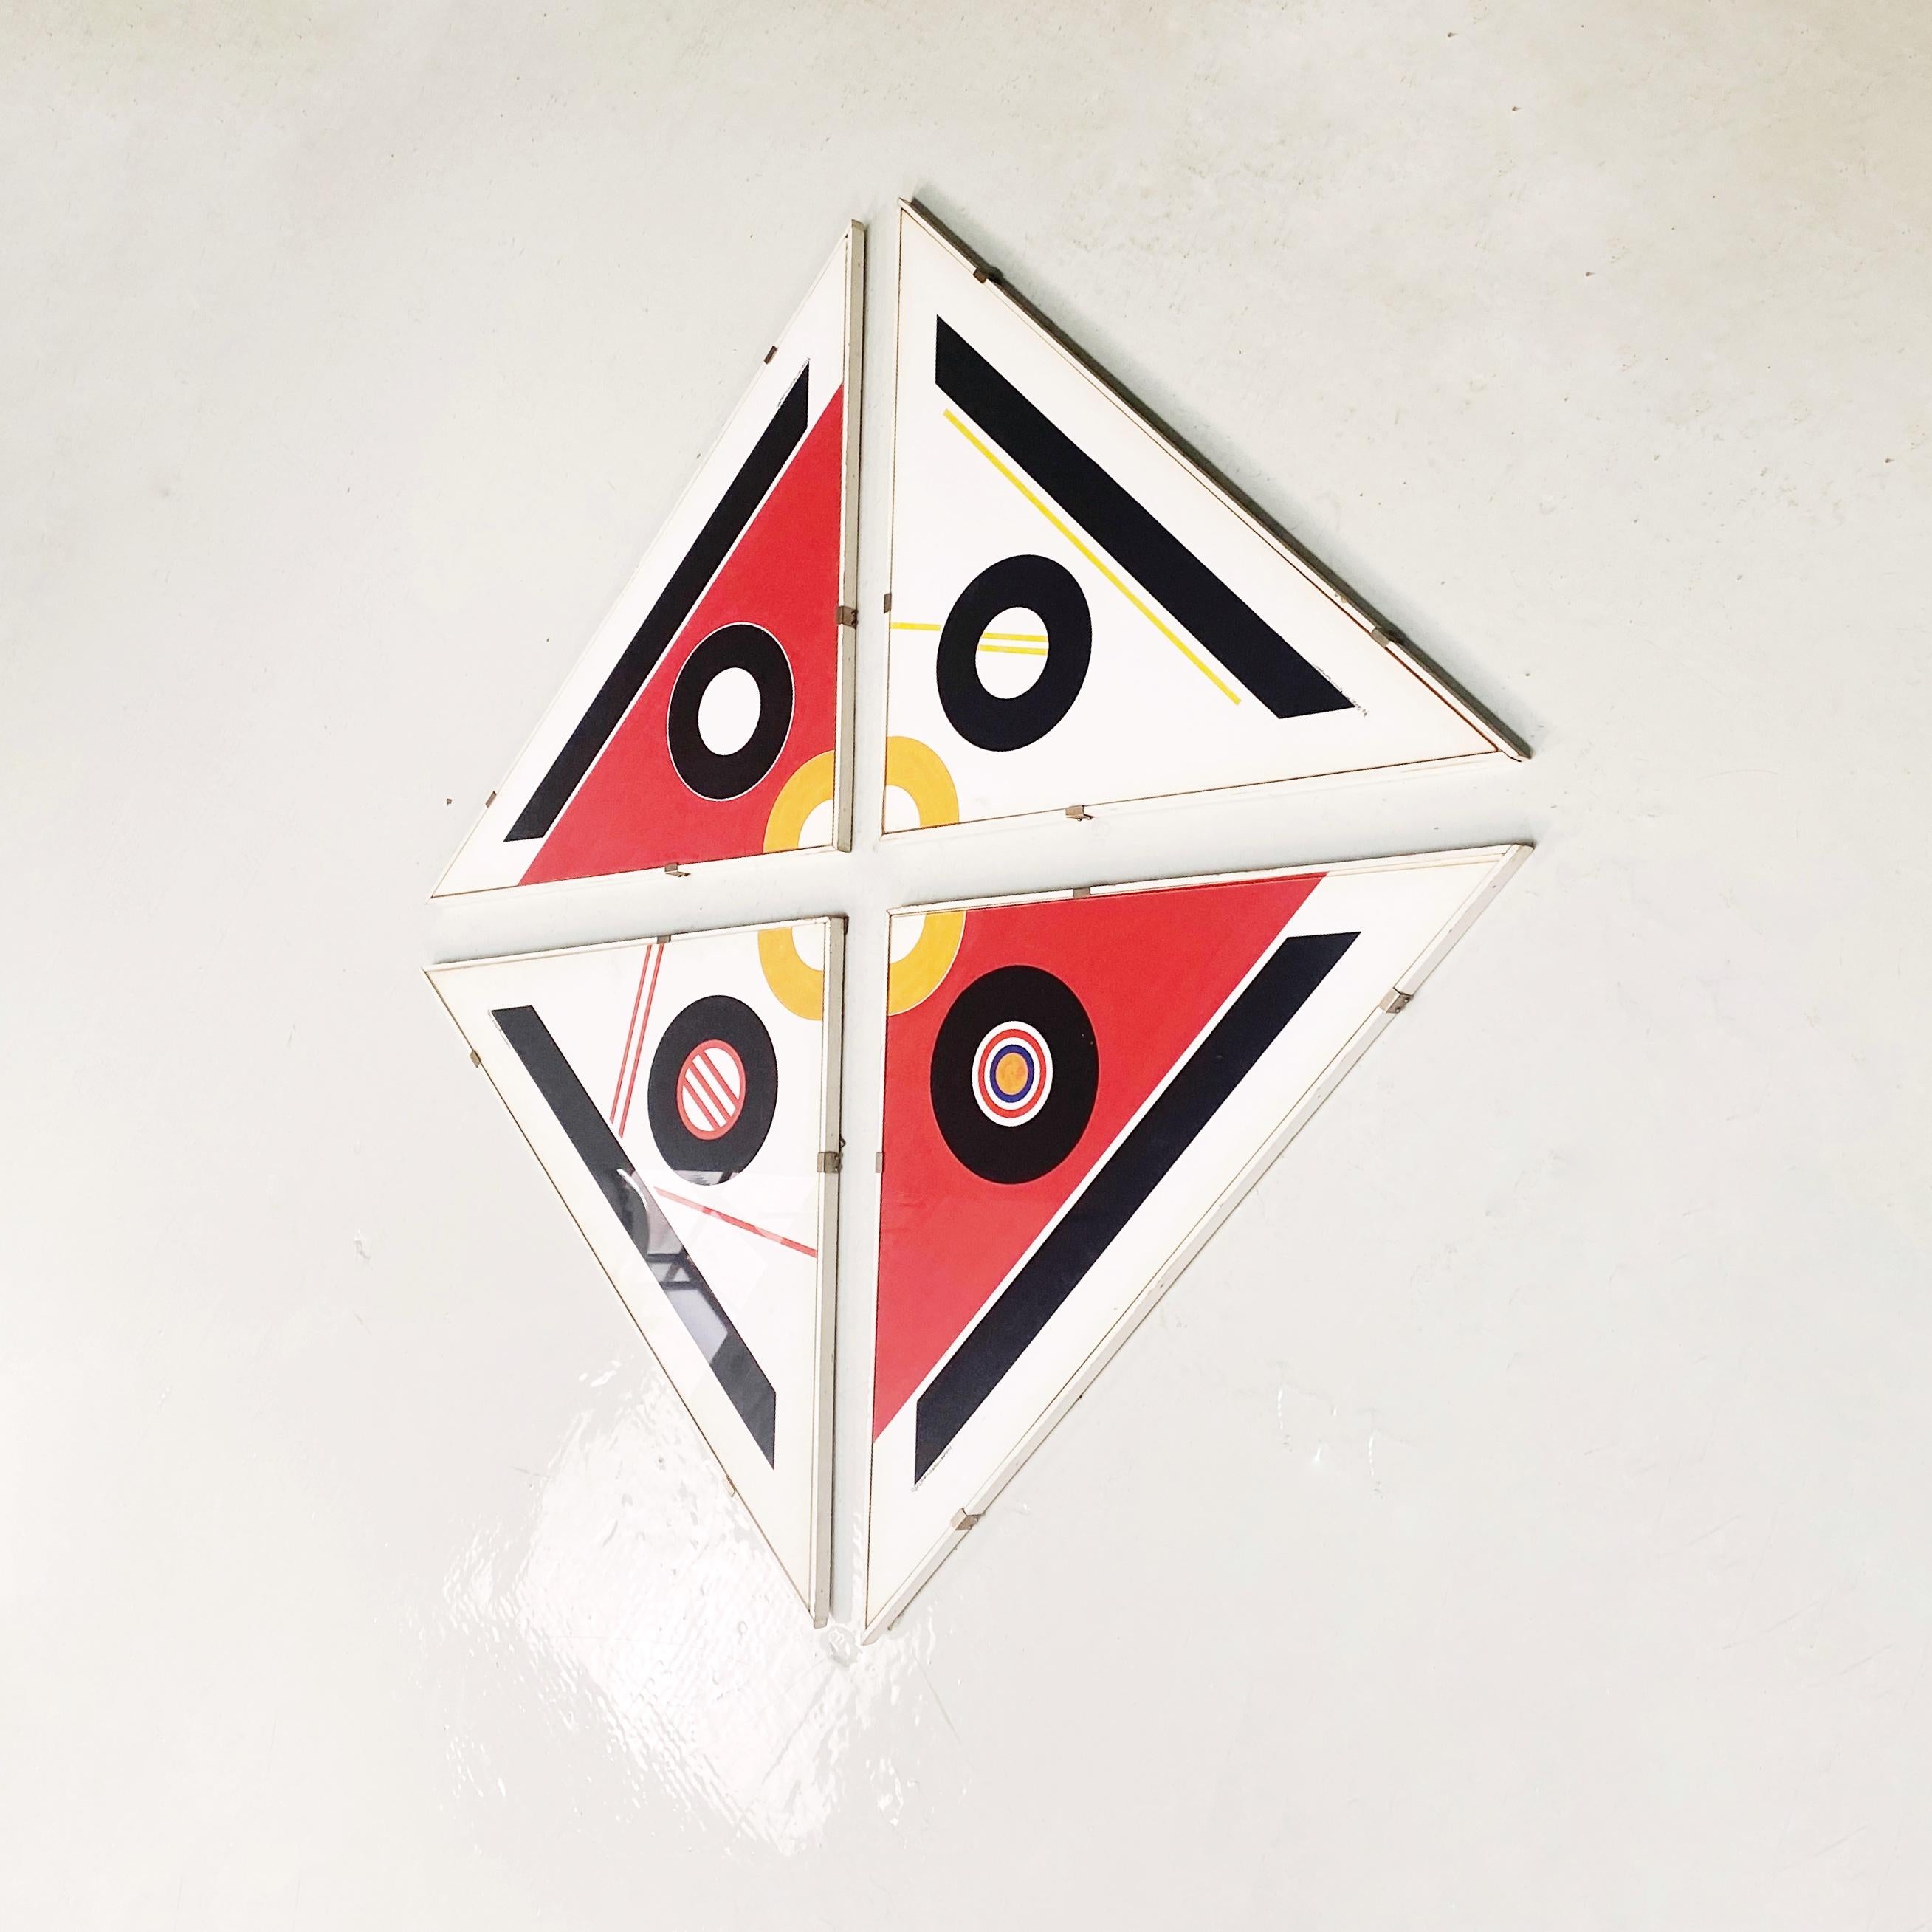 Picture with geometric decoration prints, 1980s
Set of four triangular-shaped picture with prints depicting colored circles and geometric figures. The frames are original and made to measure. It is possible to create compositions such as the